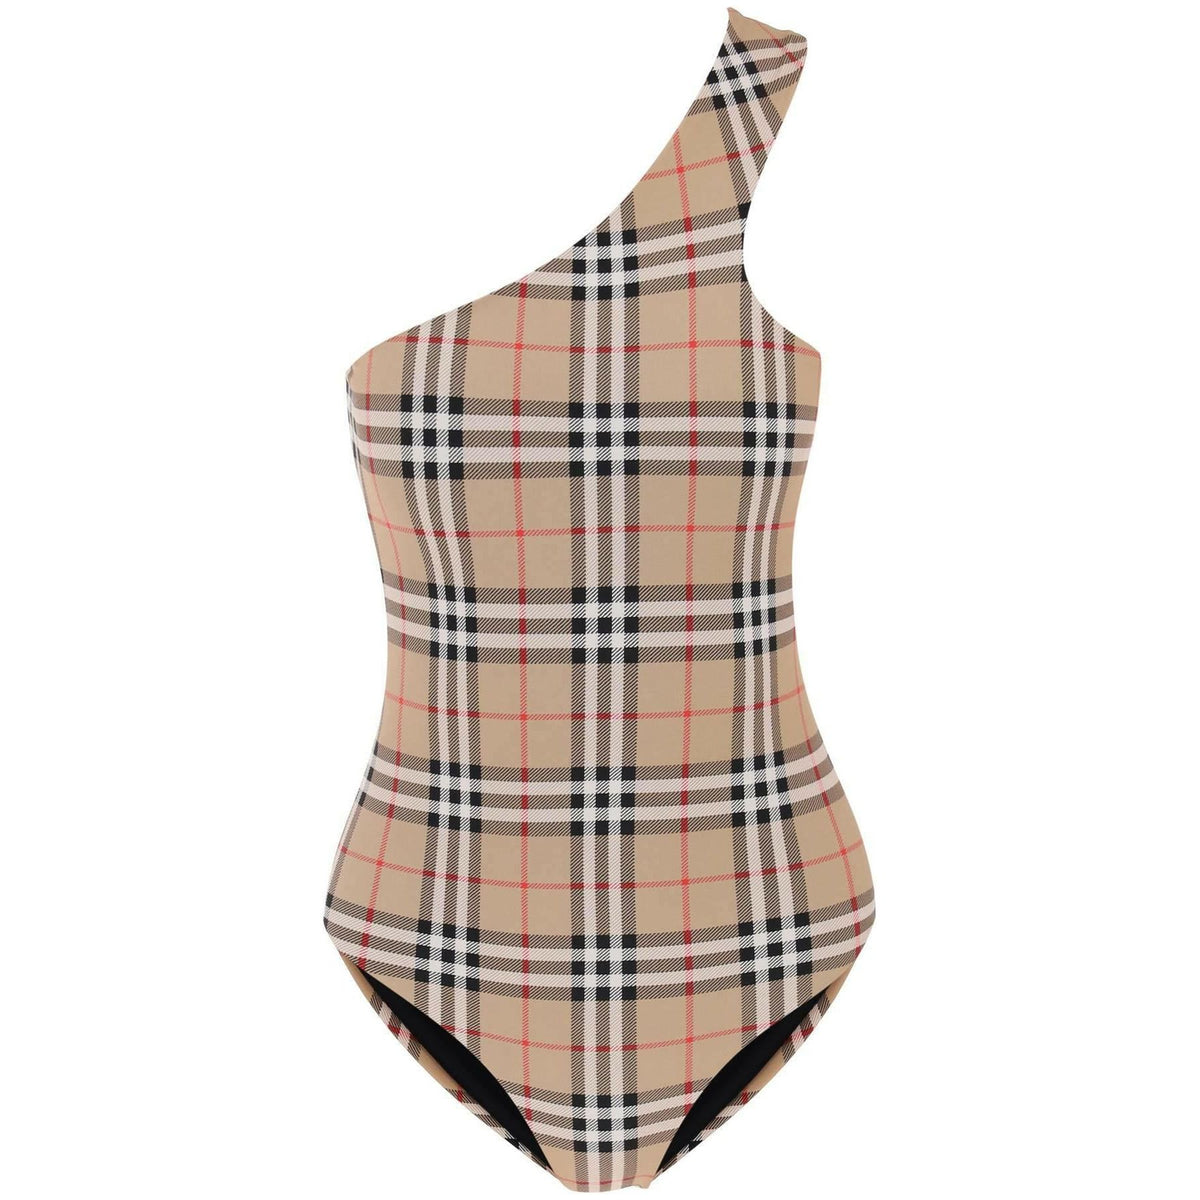 BURBERRY - Check One Shoulder One Piece Swimsuit - JOHN JULIA